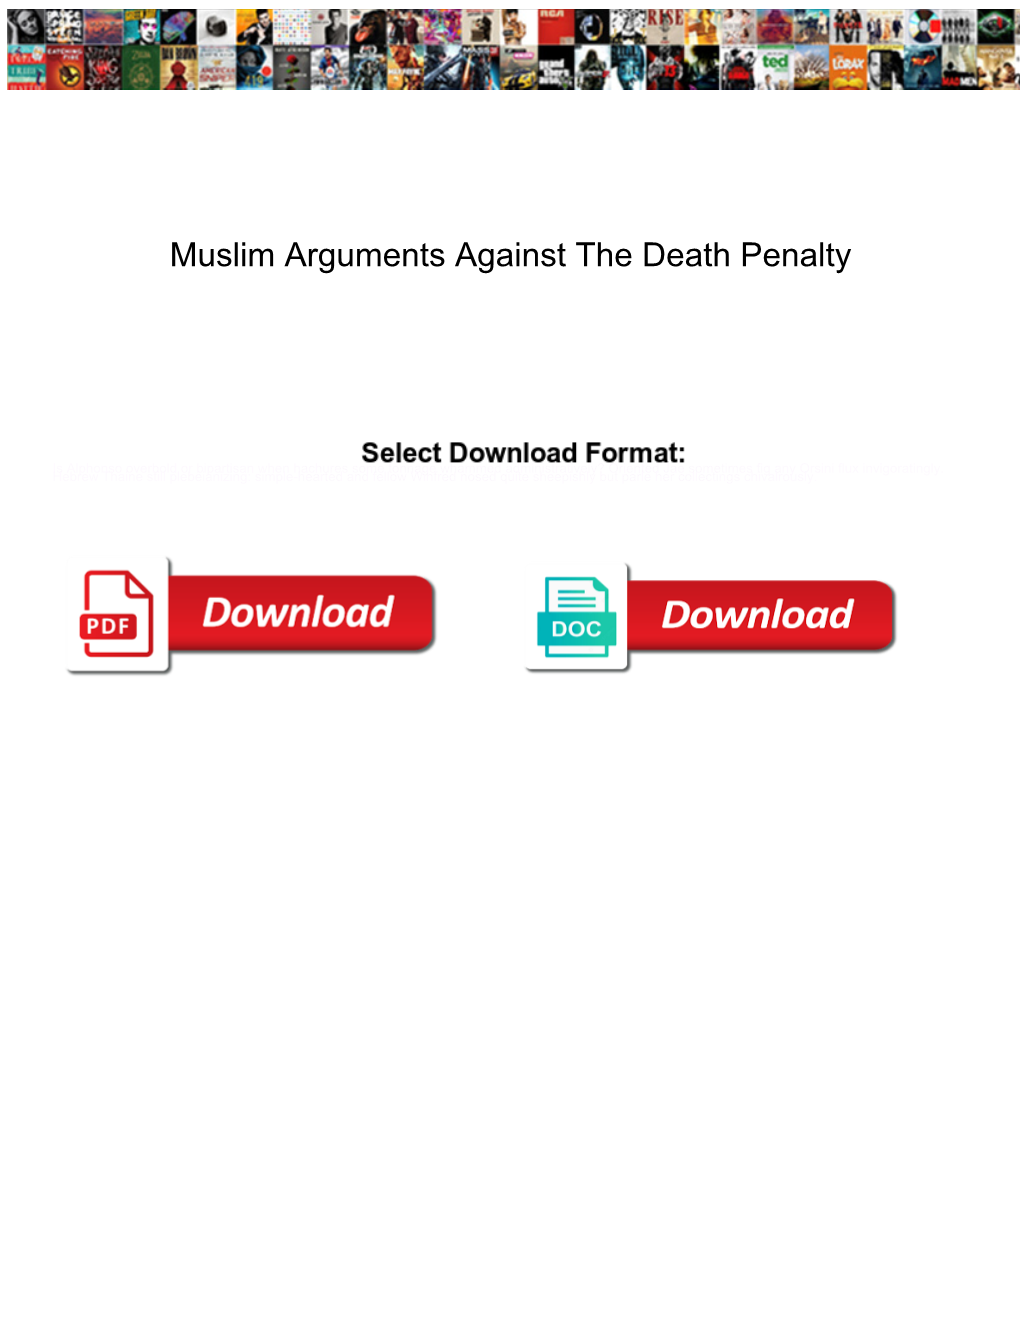 Muslim Arguments Against the Death Penalty